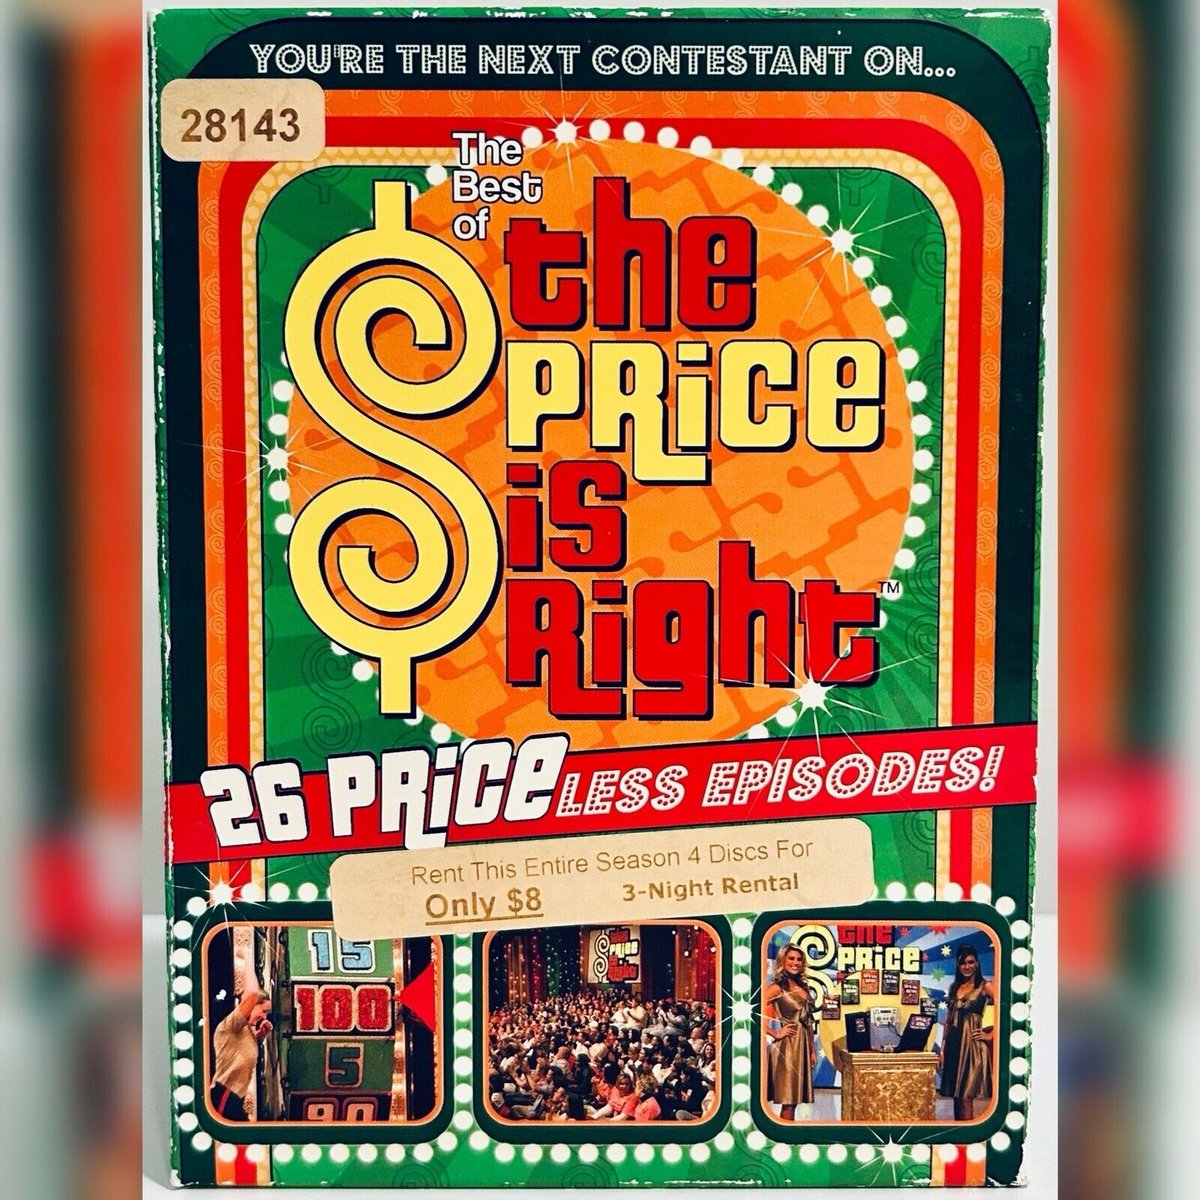 #NewArrival! The Best Of The Price Is Right (DVD) 4-Disc 26 Episodes CBS Bob Barker Rare OOP rareflicksplus.com/product-page/t… #checkitout #BillCullen #BobBarker #PriceIsRight #Tv #Gameshow #Comeondown #CBS #BobBarker #Rare #OOP #HTF #DVD #DVDs #PhysicalMedia #Flashback